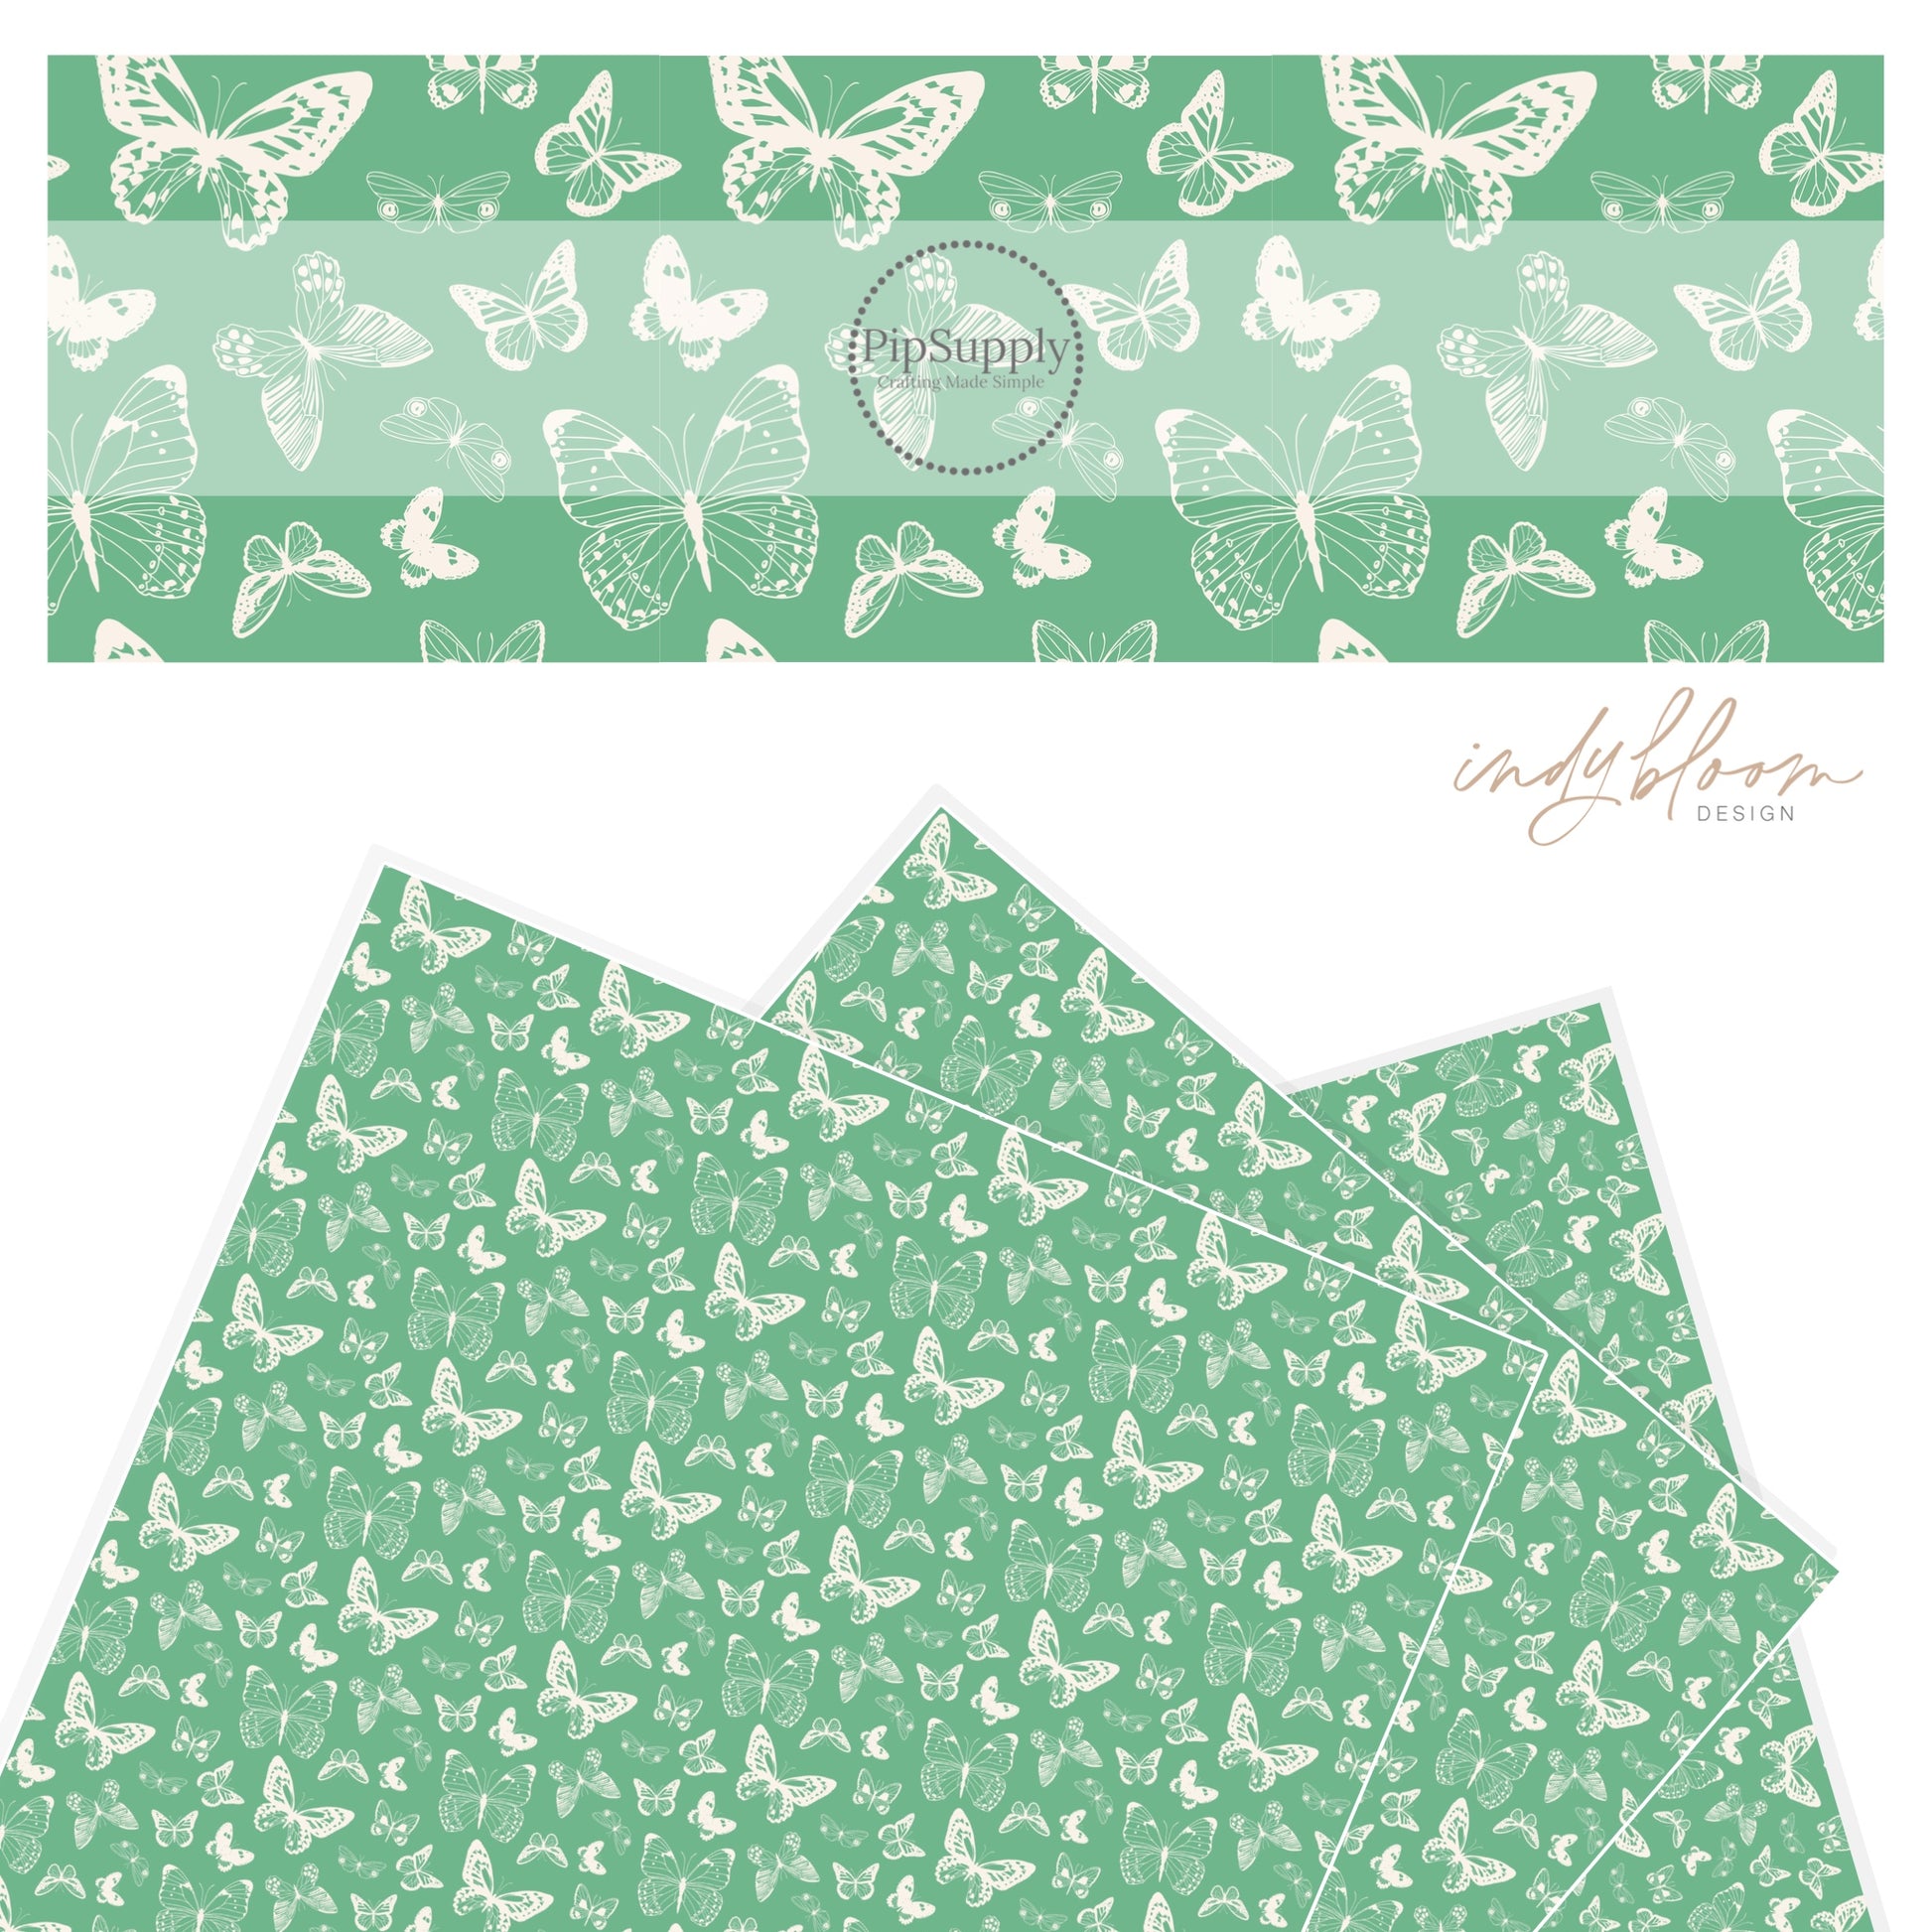 Butterfly pattern on bright green faux leather sheet.